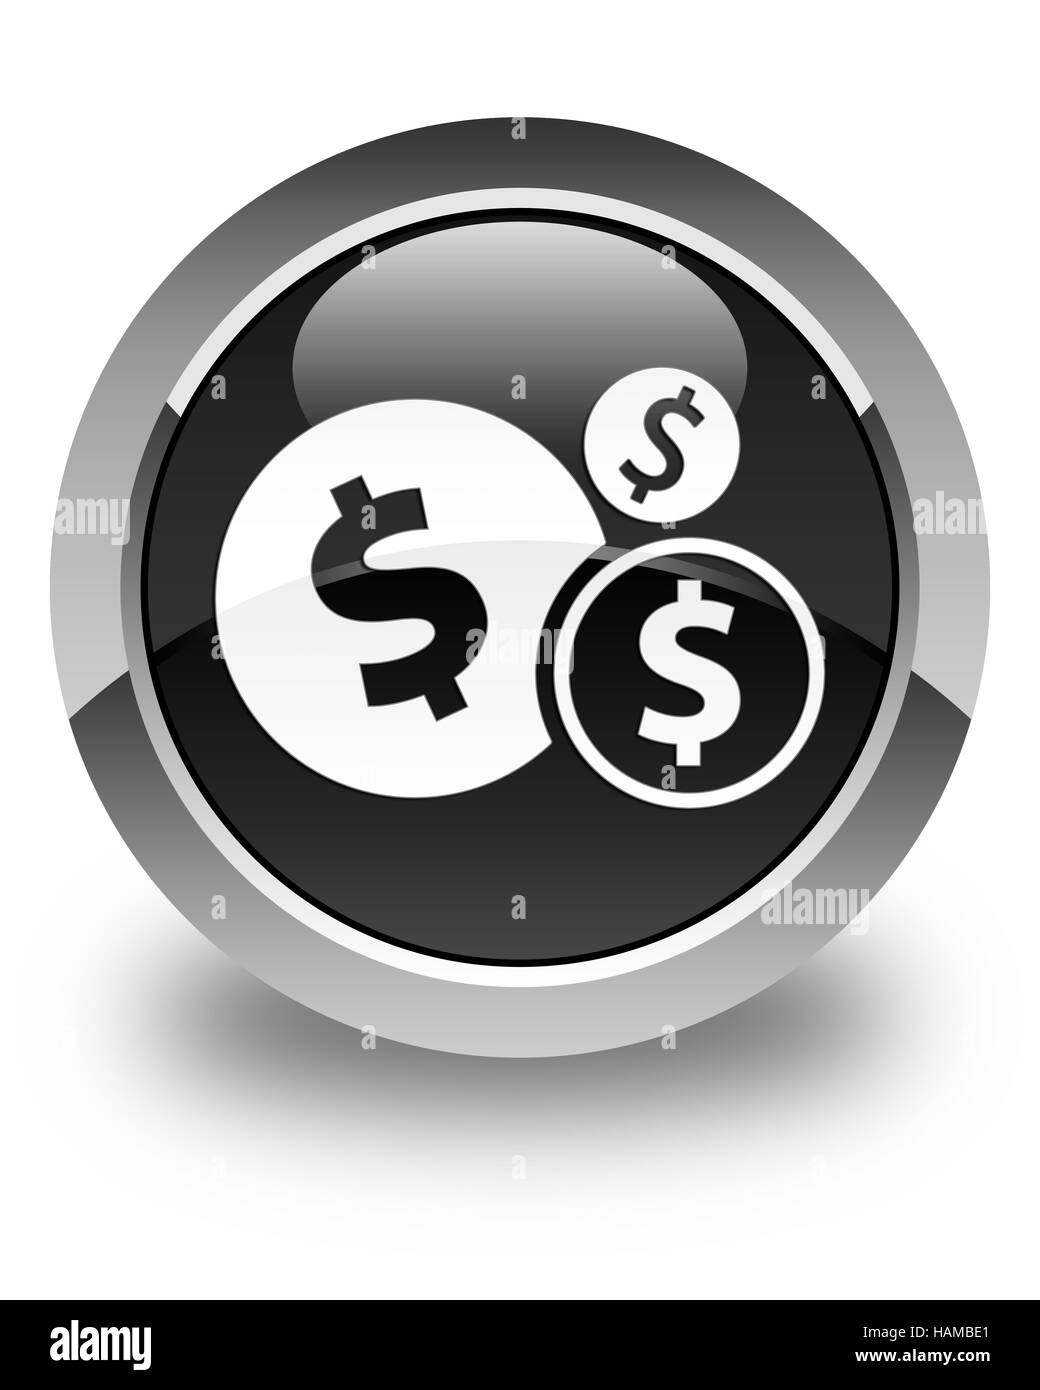 Finances dollar sign icon isolated on glossy black round button abstract illustration Stock Photo